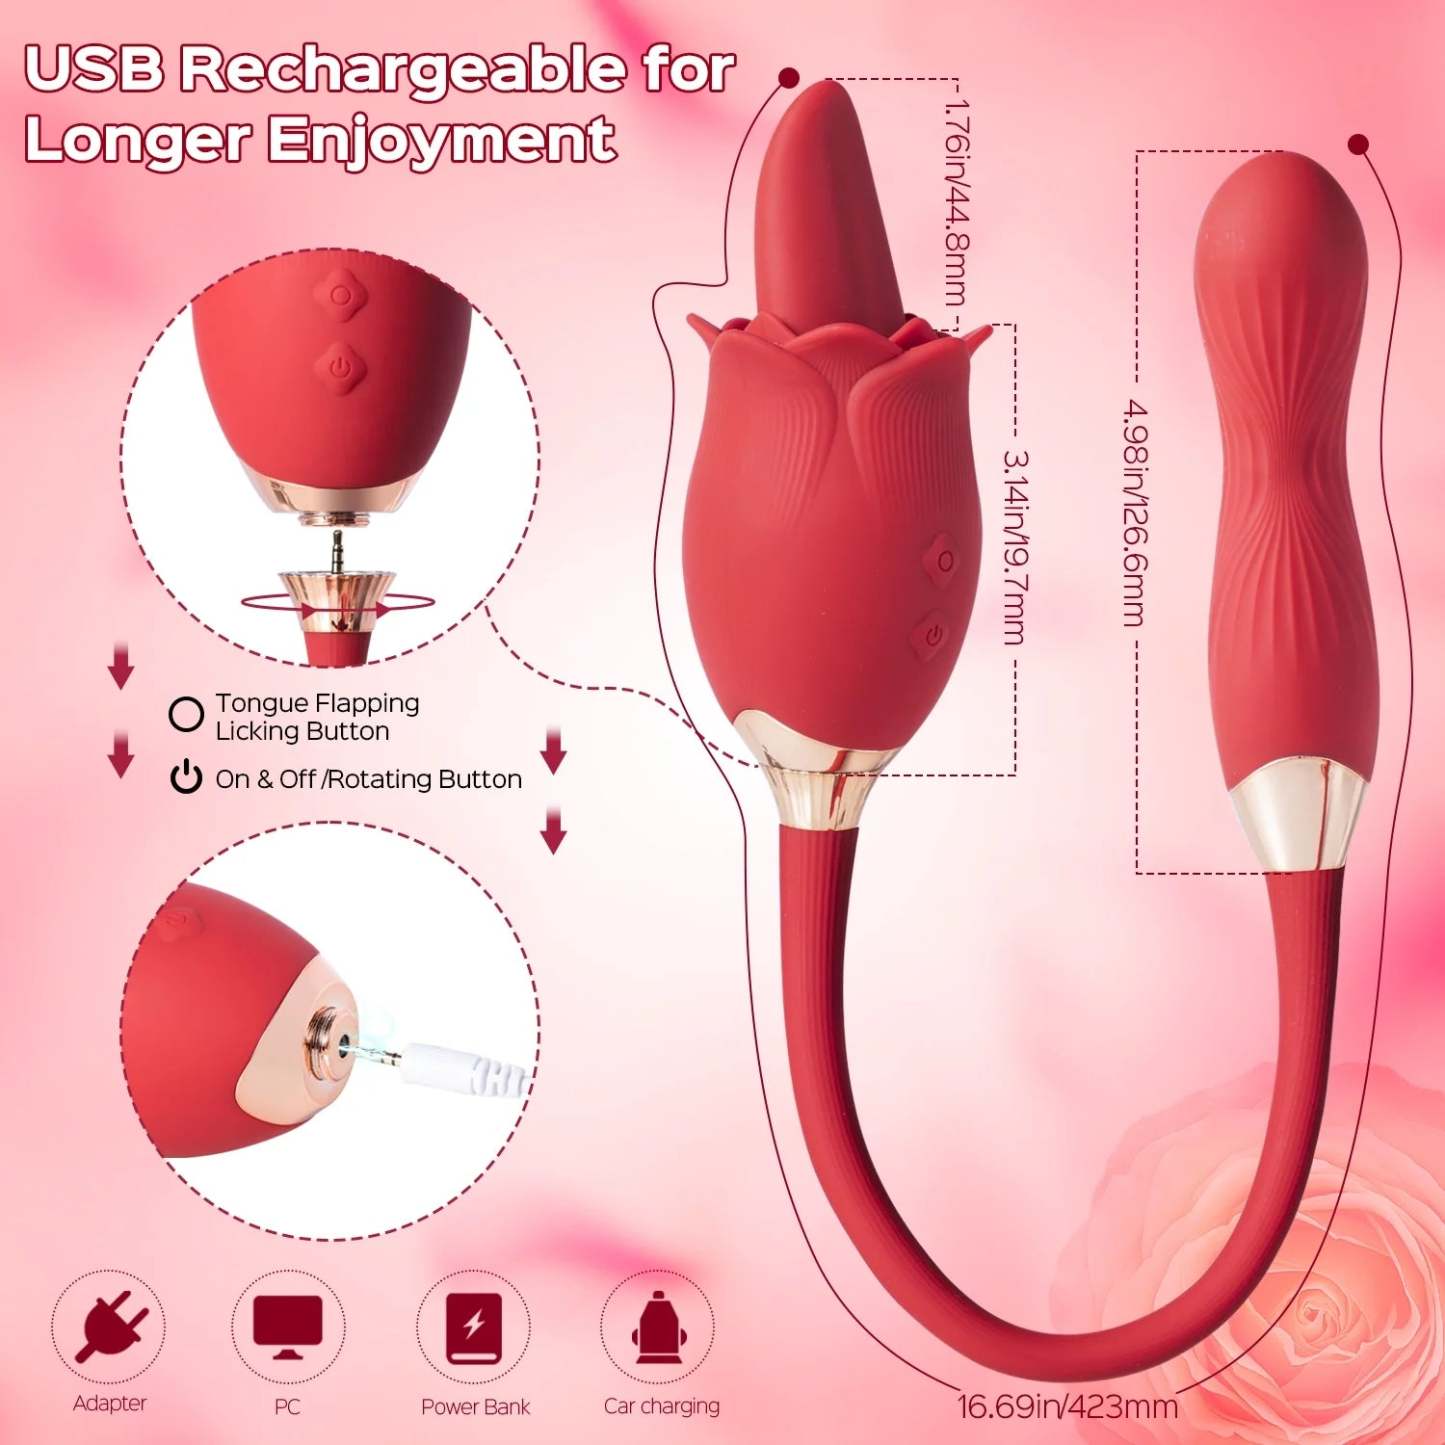 Evelyn Rose Vibrator - Powerful Rechargeable Silicone Wand Massager for Women-BestGSpot